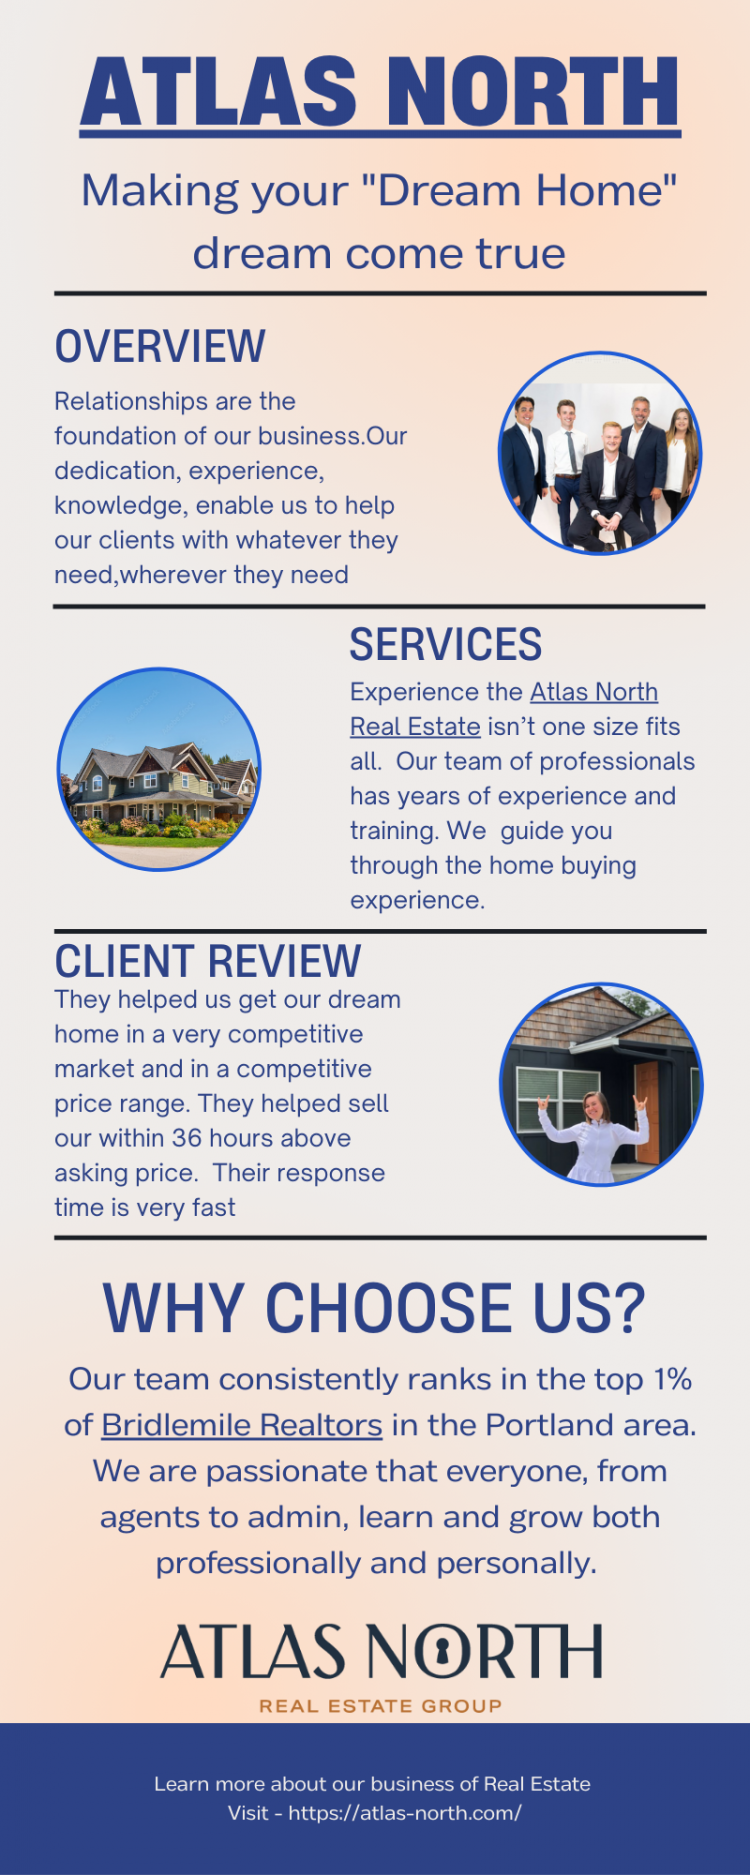 Atlas North customizes its services to meet the needs of its clients. We recognise that purchasing a home is a huge decision that only happens once or twice in a lifetime, and we're here to help you through every step of the process, from house hunting through closing. Atlas North real estate provide you the chance to live the life you've always wanted! For further information, please visit our website or call us at (503) 546-9955.